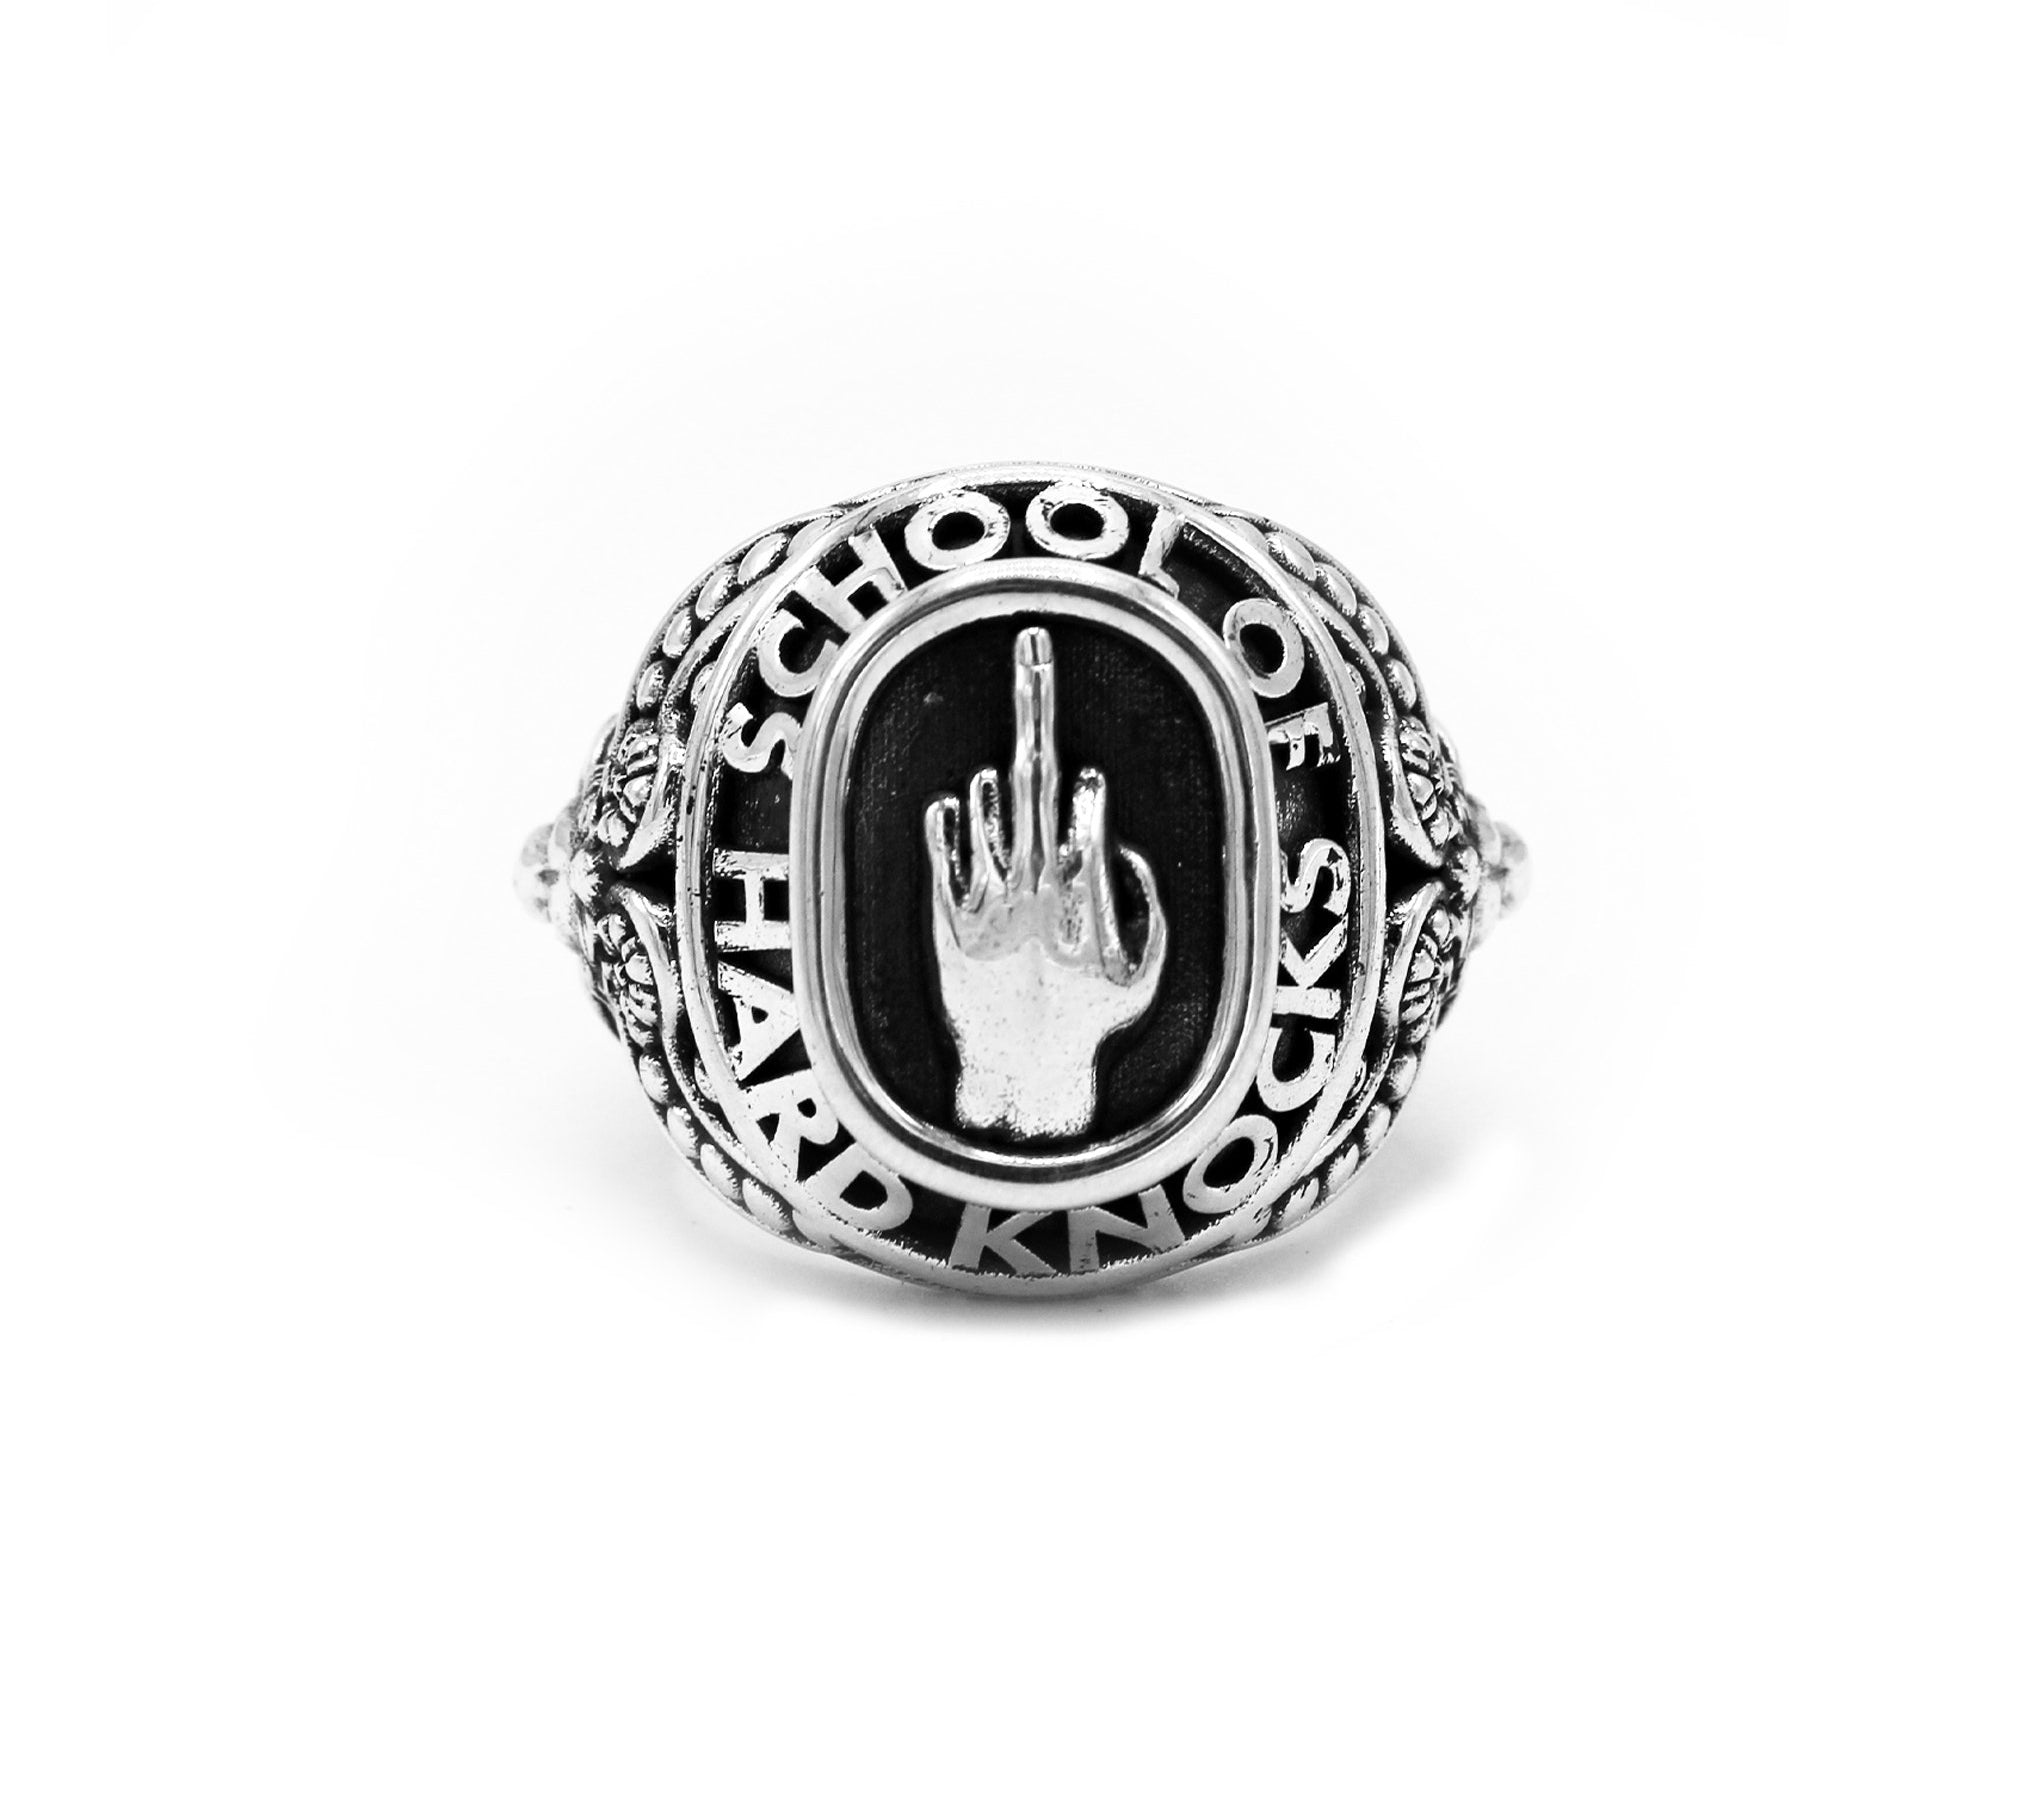 School of hard knocks class ring, middle finger class ring